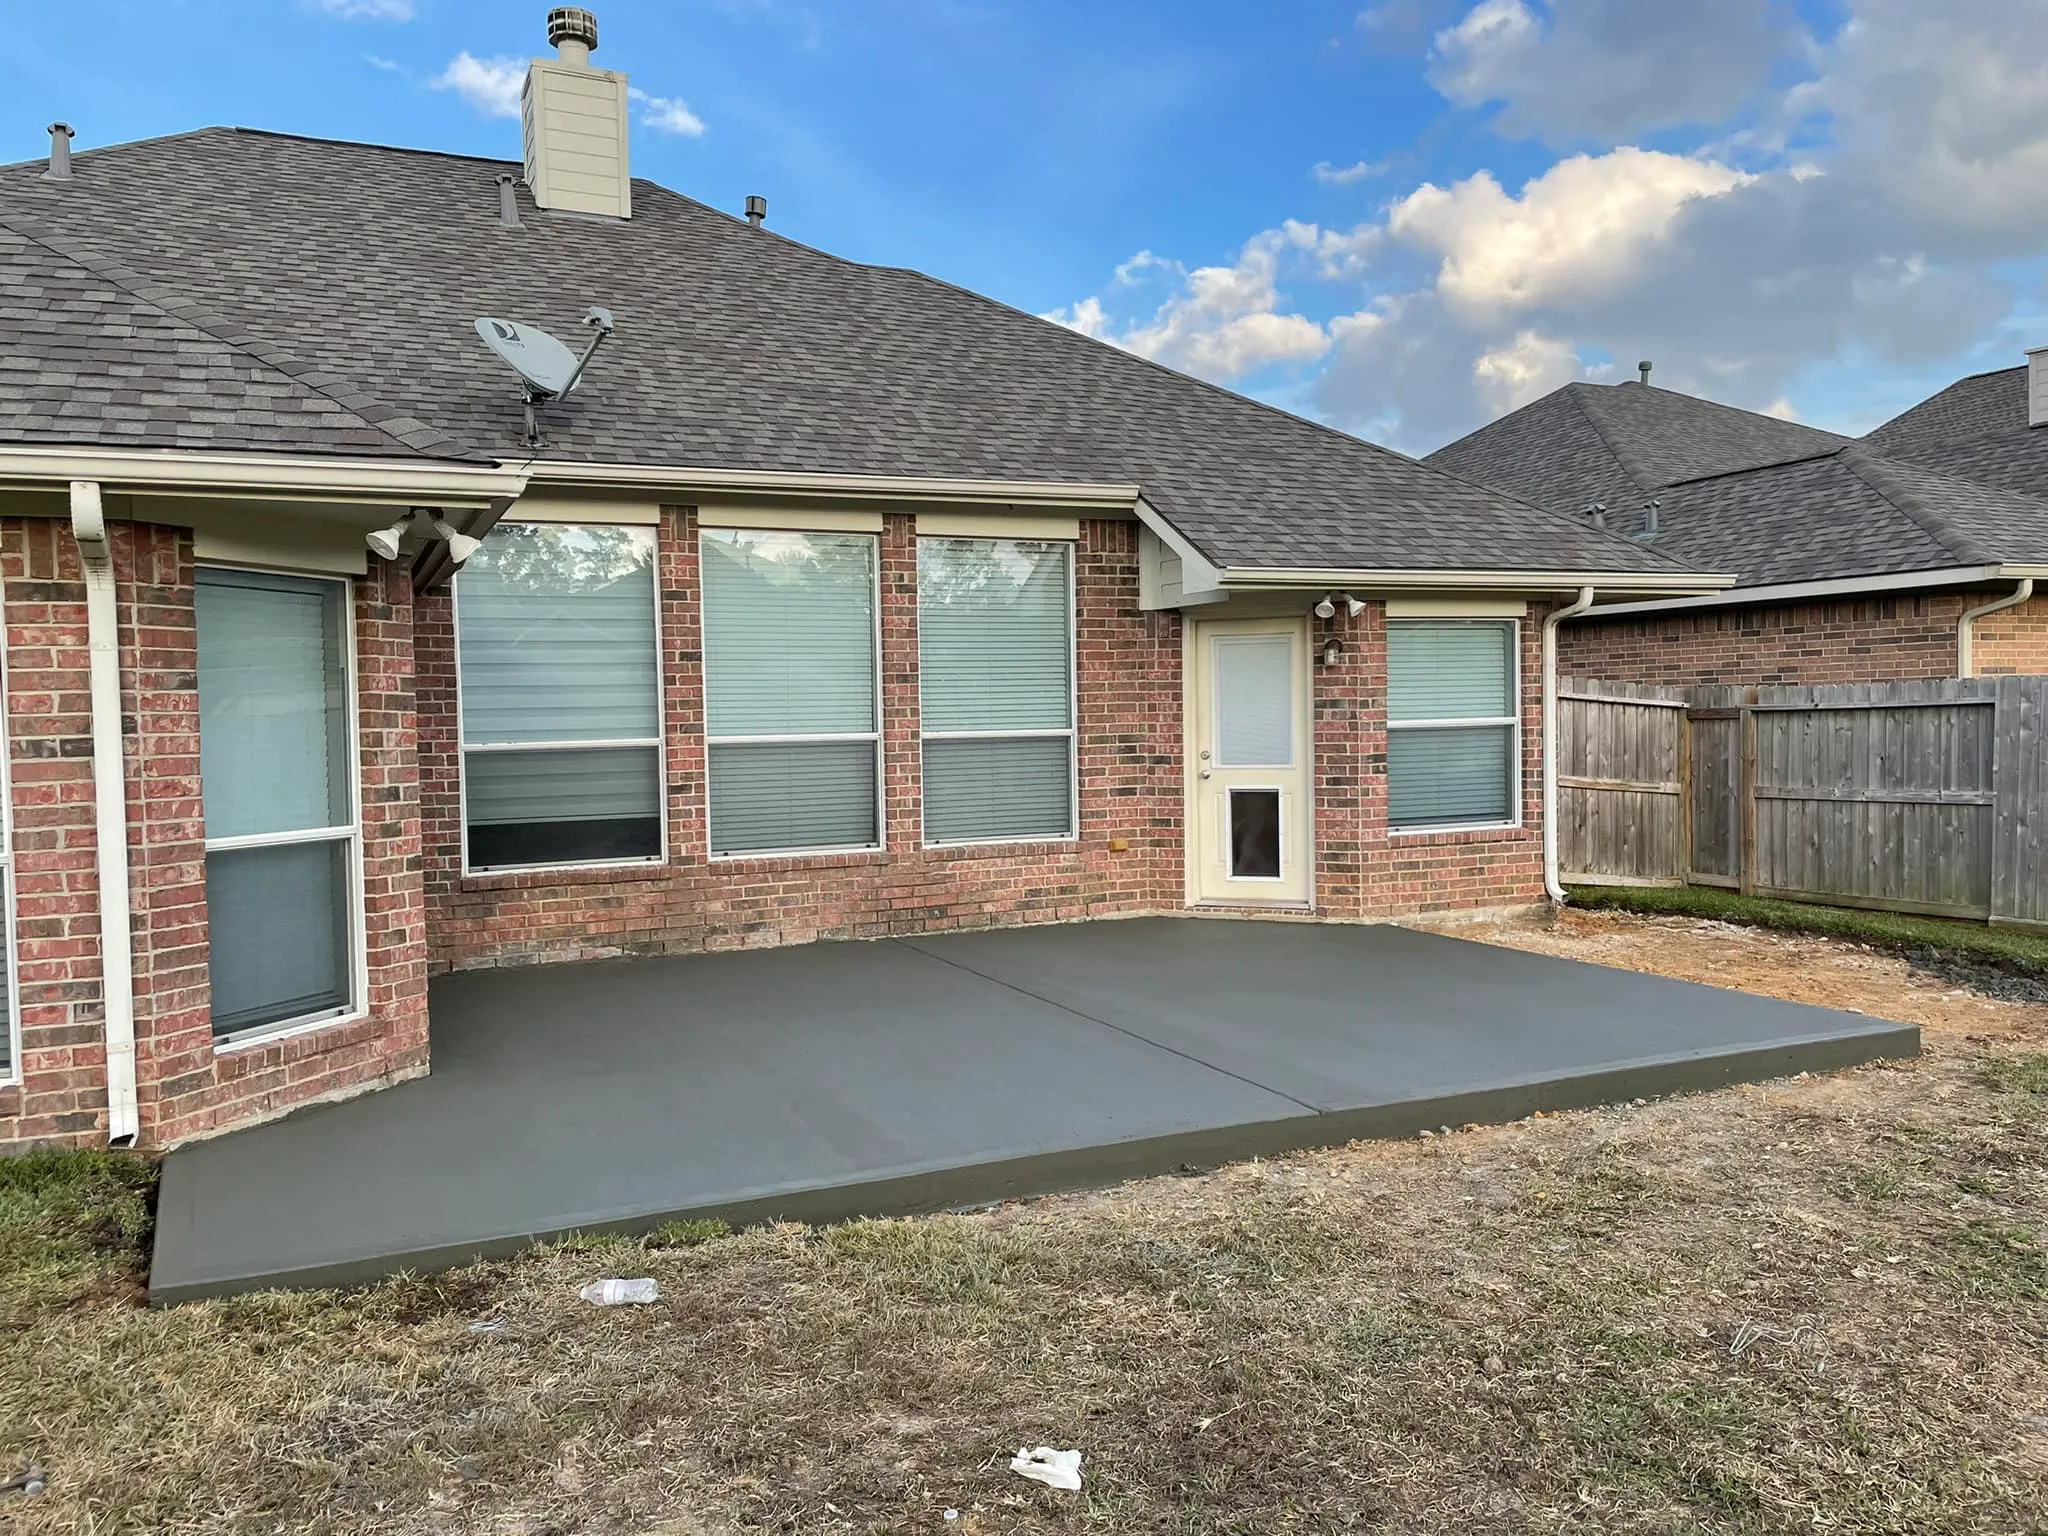 Our Foundation Installation service is a reliable and affordable option for homeowners looking to have a new foundation installed. We use the latest technology and equipment to ensure a quality installation that will last. for Villa Concrete in The Woodlands, TX